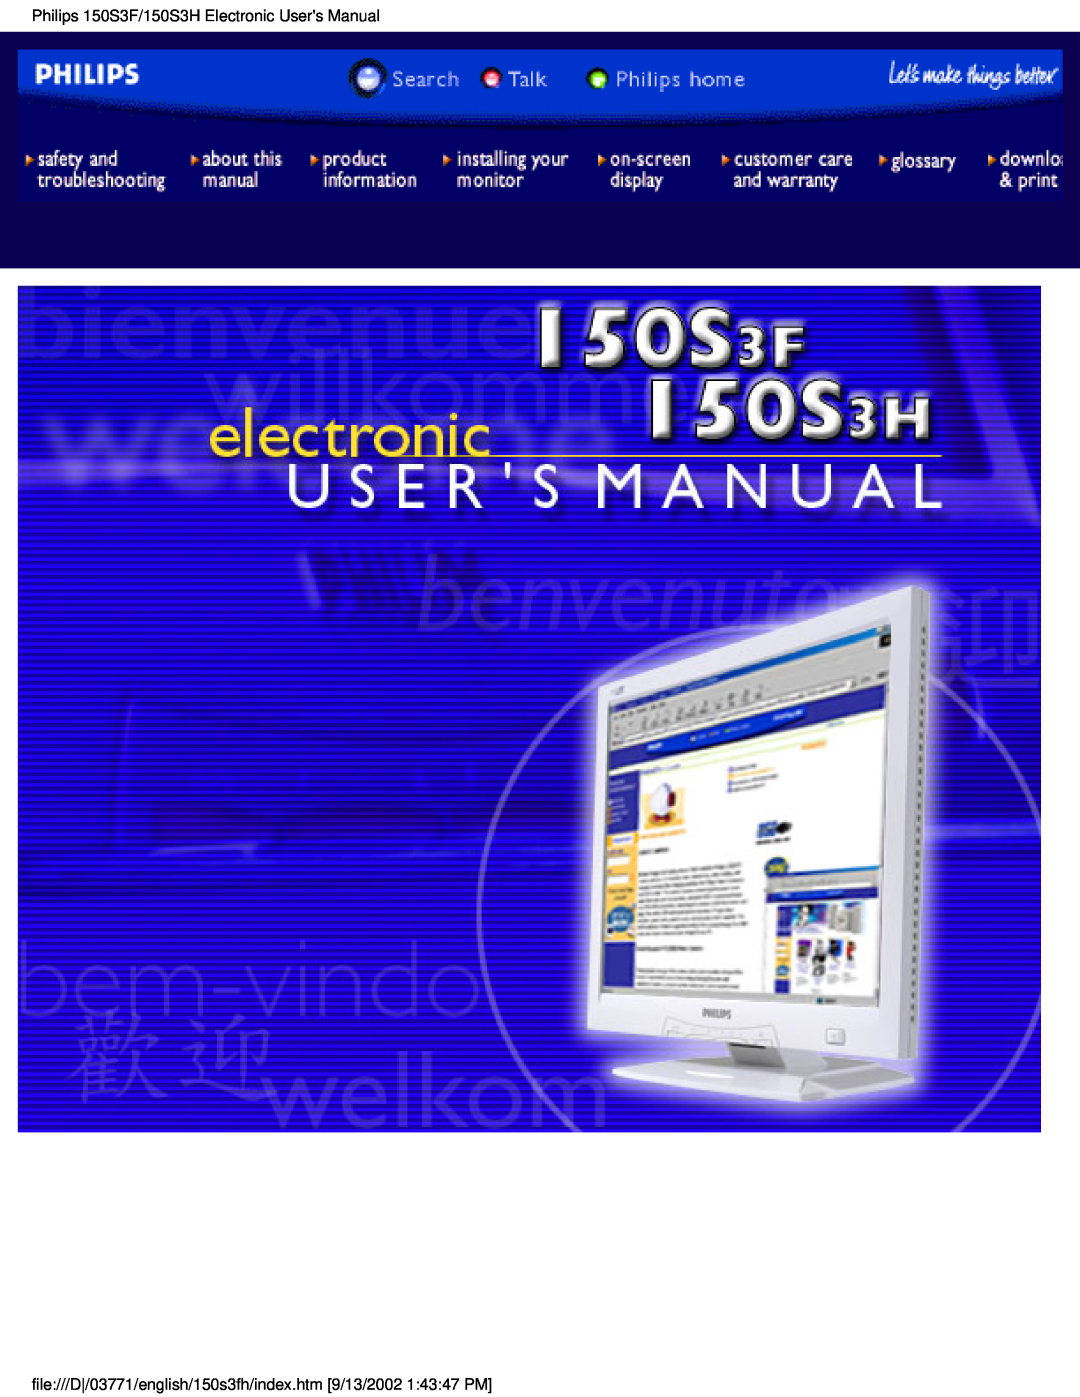 Philips 150S3H user manual file///D/03771/english/150s3fh/index.htm 9/13/2002 14347 PM 